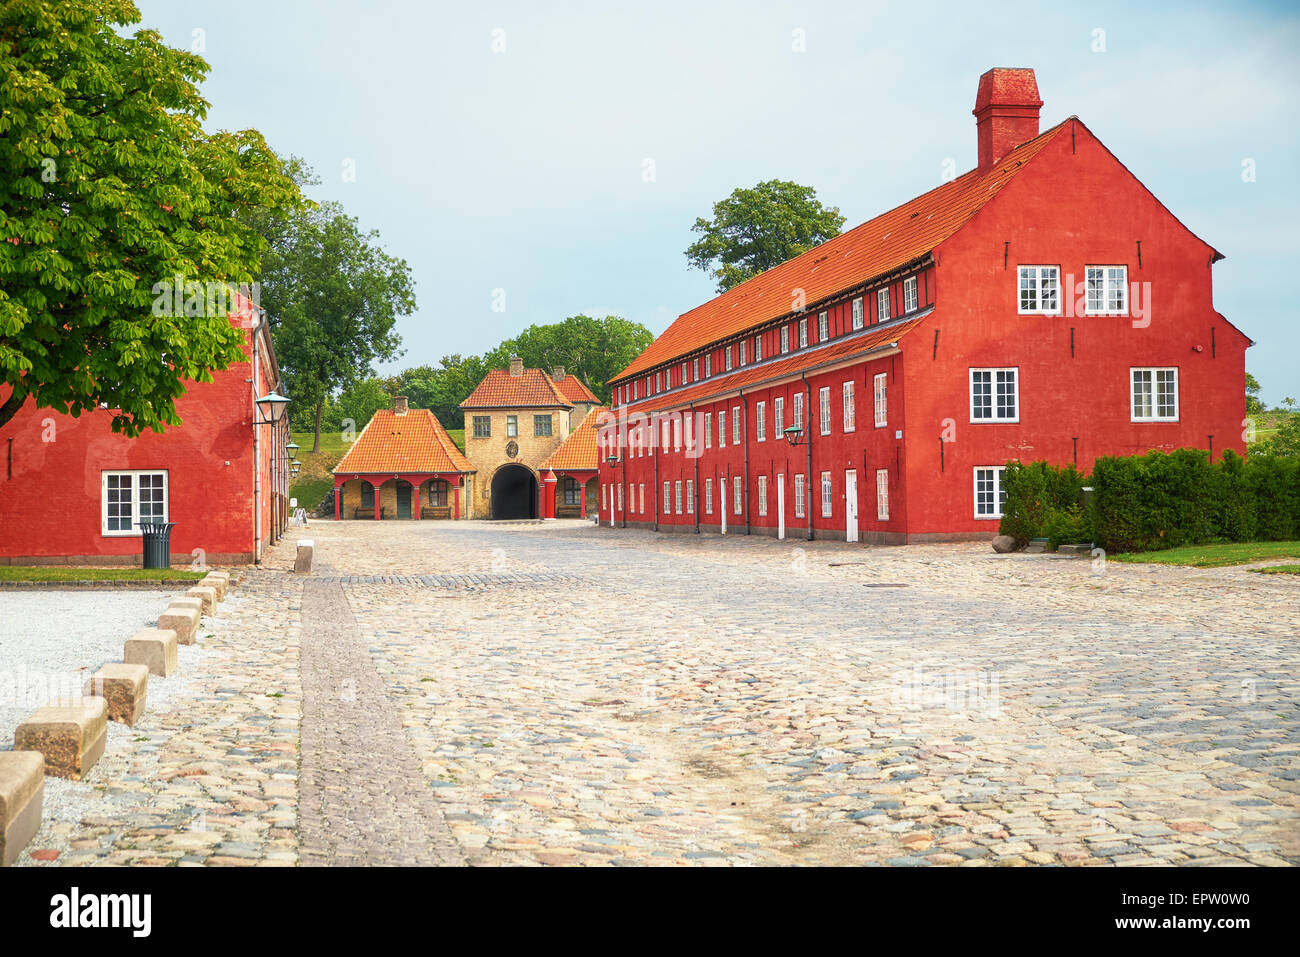 The Prince's Bastion, the Princess' Bastion and the interior side of the North Gate  (Norway's Gate) of  in Kastellet in Copenha Stock Photo